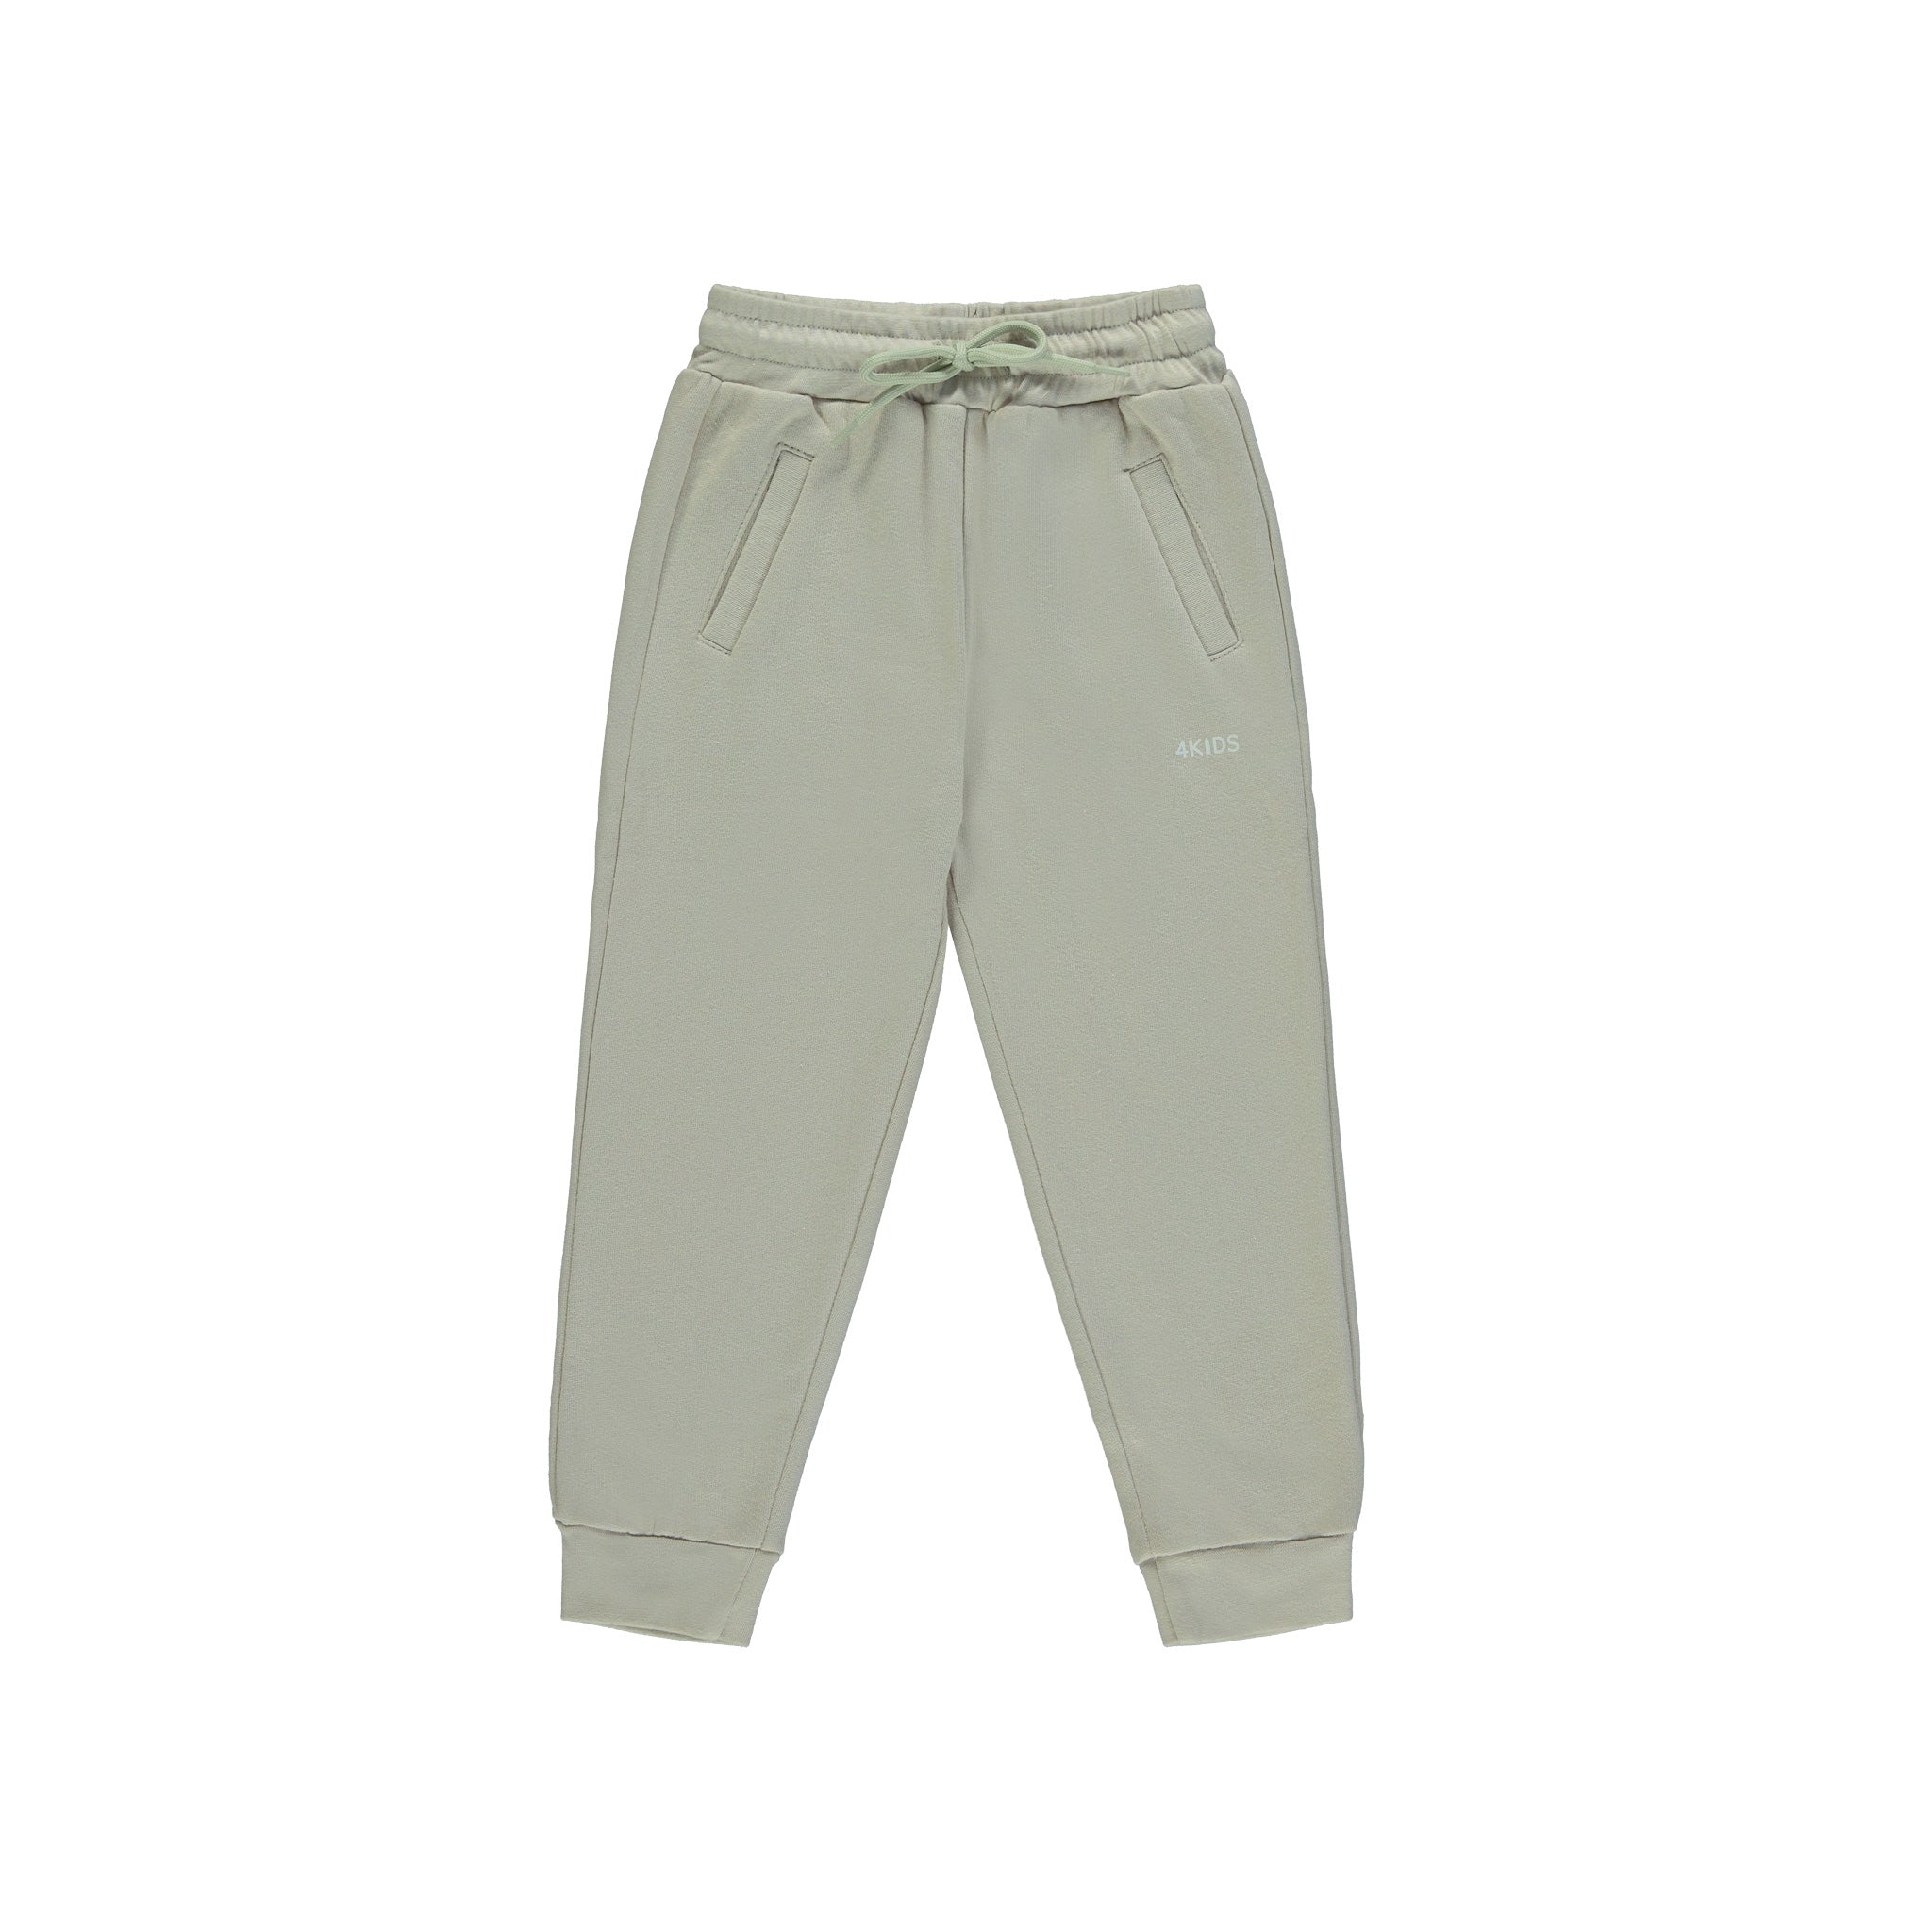 ⇒ Grey Sport and dance Child Jogging Pant